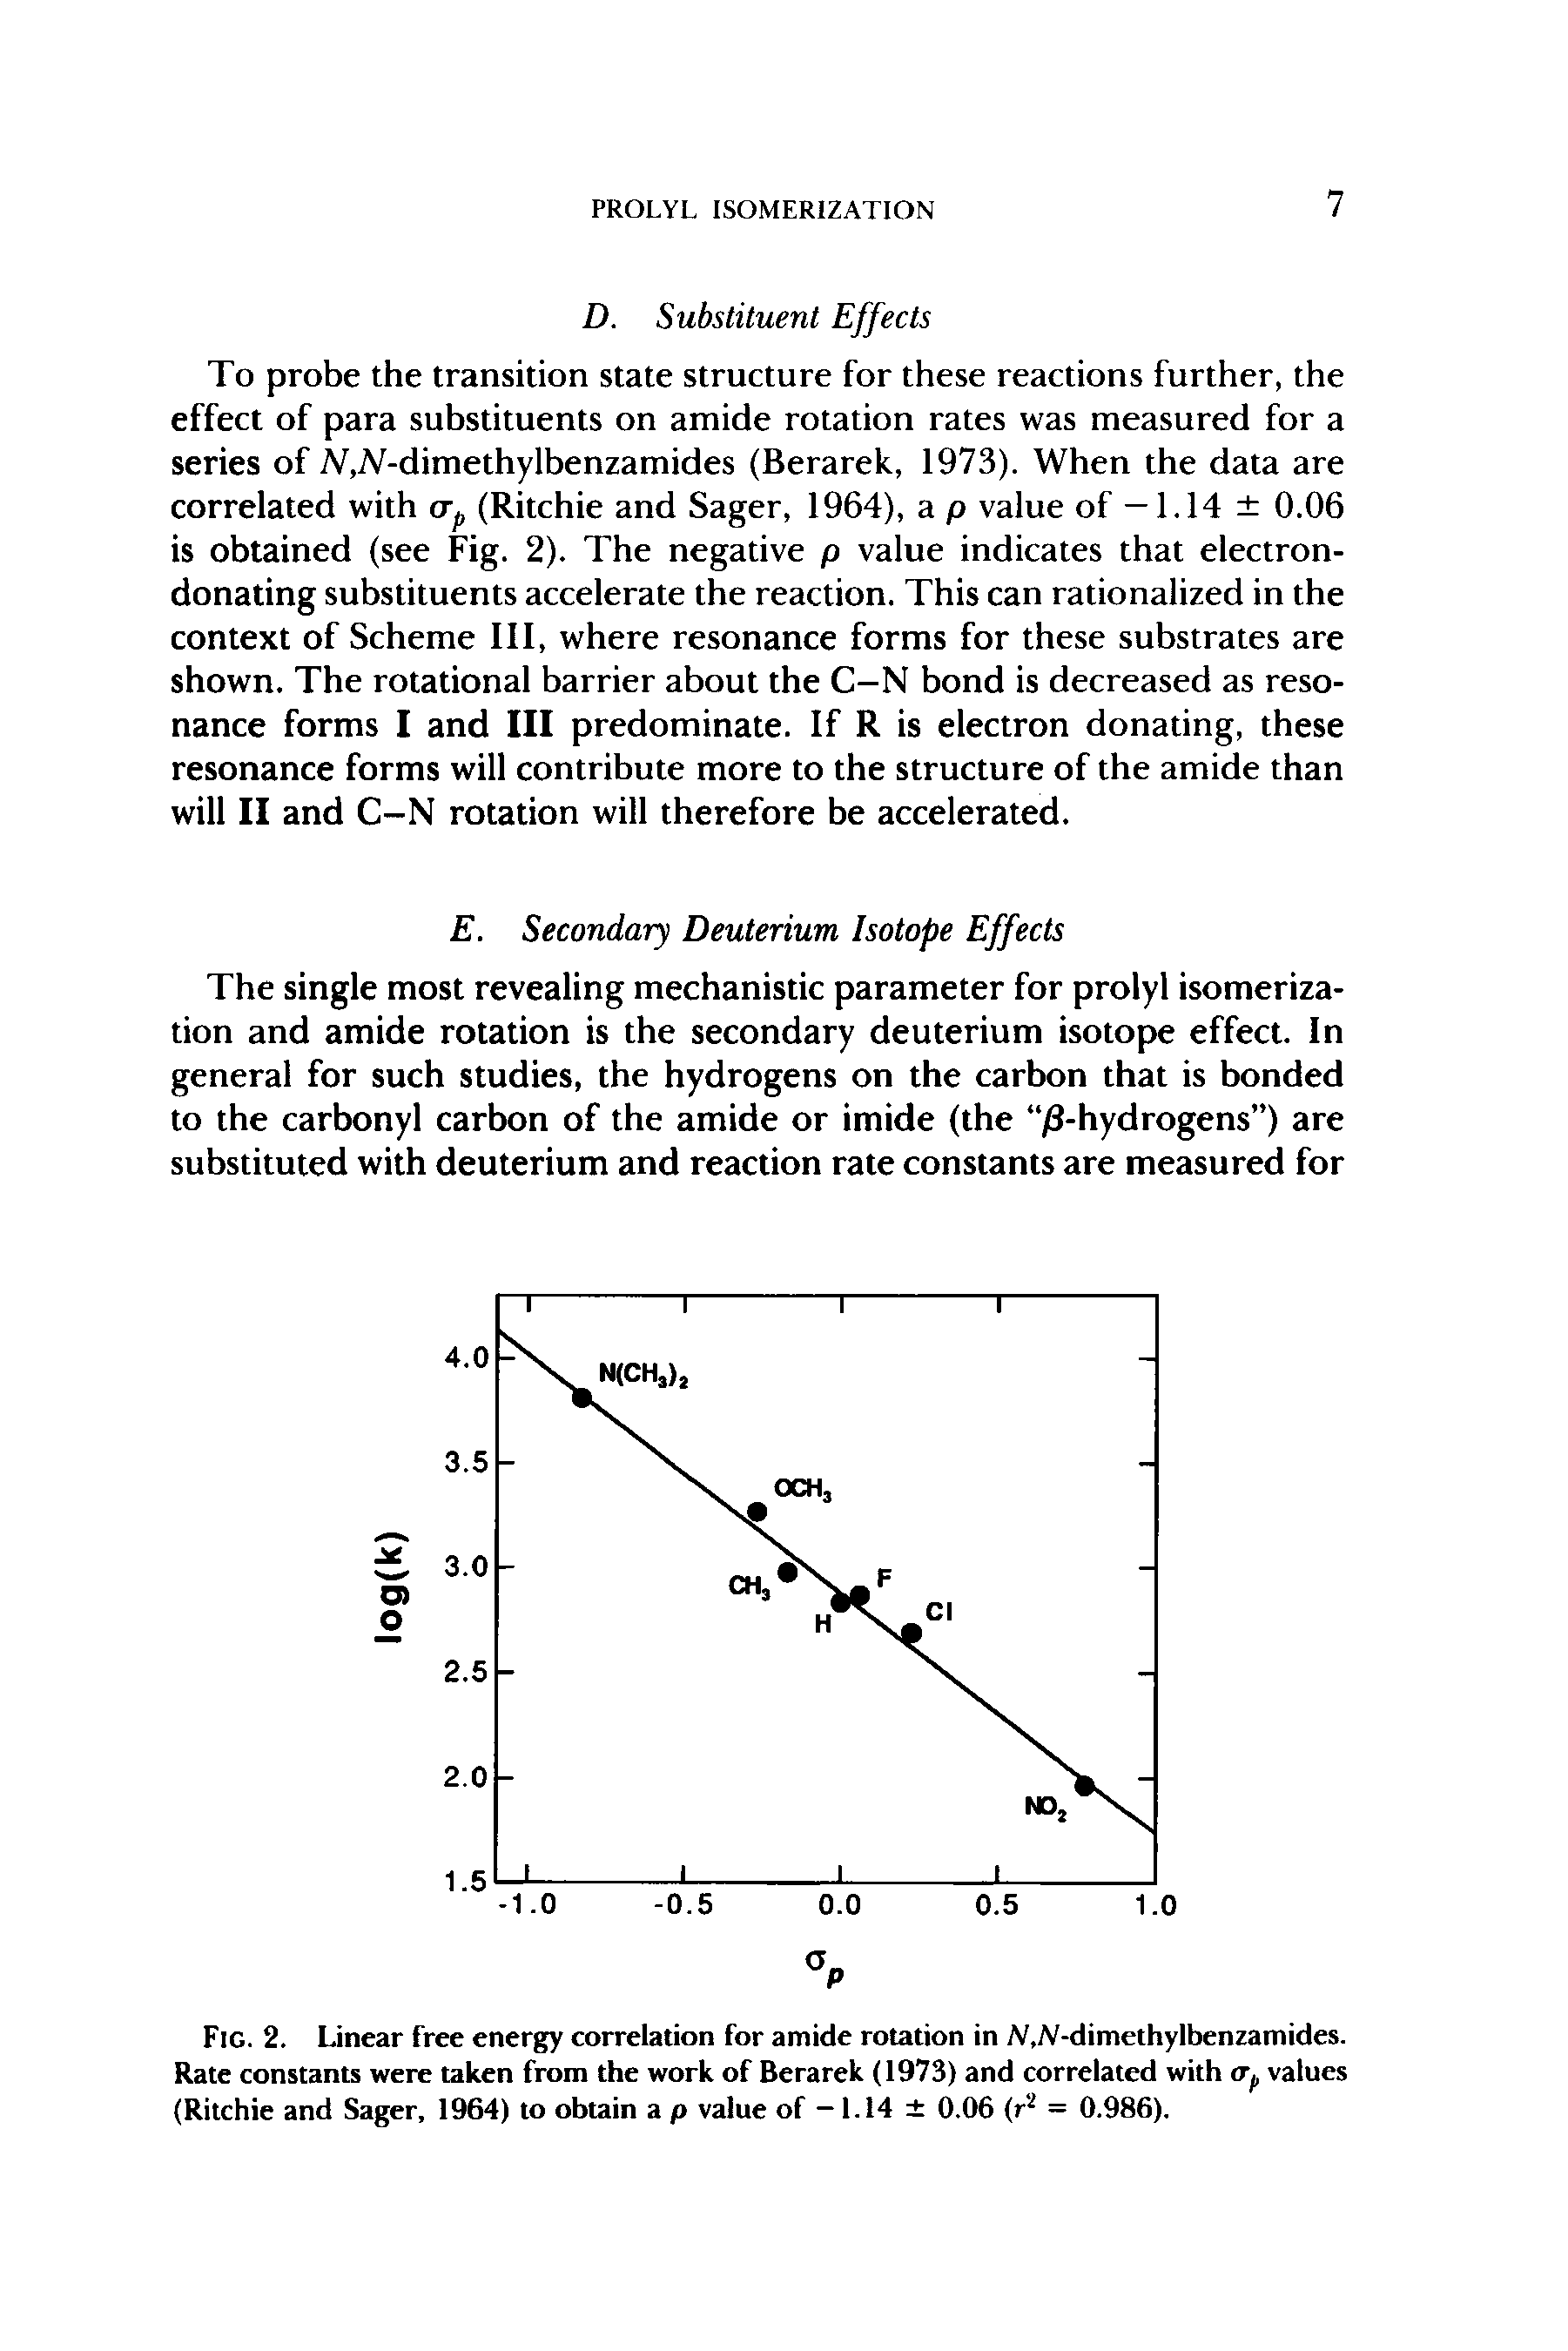 Fig. 2. Linear free energy correlation for amide rotation in Af,Af-dimethylbenzamides. Rate constants were taken from the work of Berarek (1973) and correlated with values (Ritchie and Sager, 1964) to obtain a p value of -1.14 0.06 (r = 0.986).